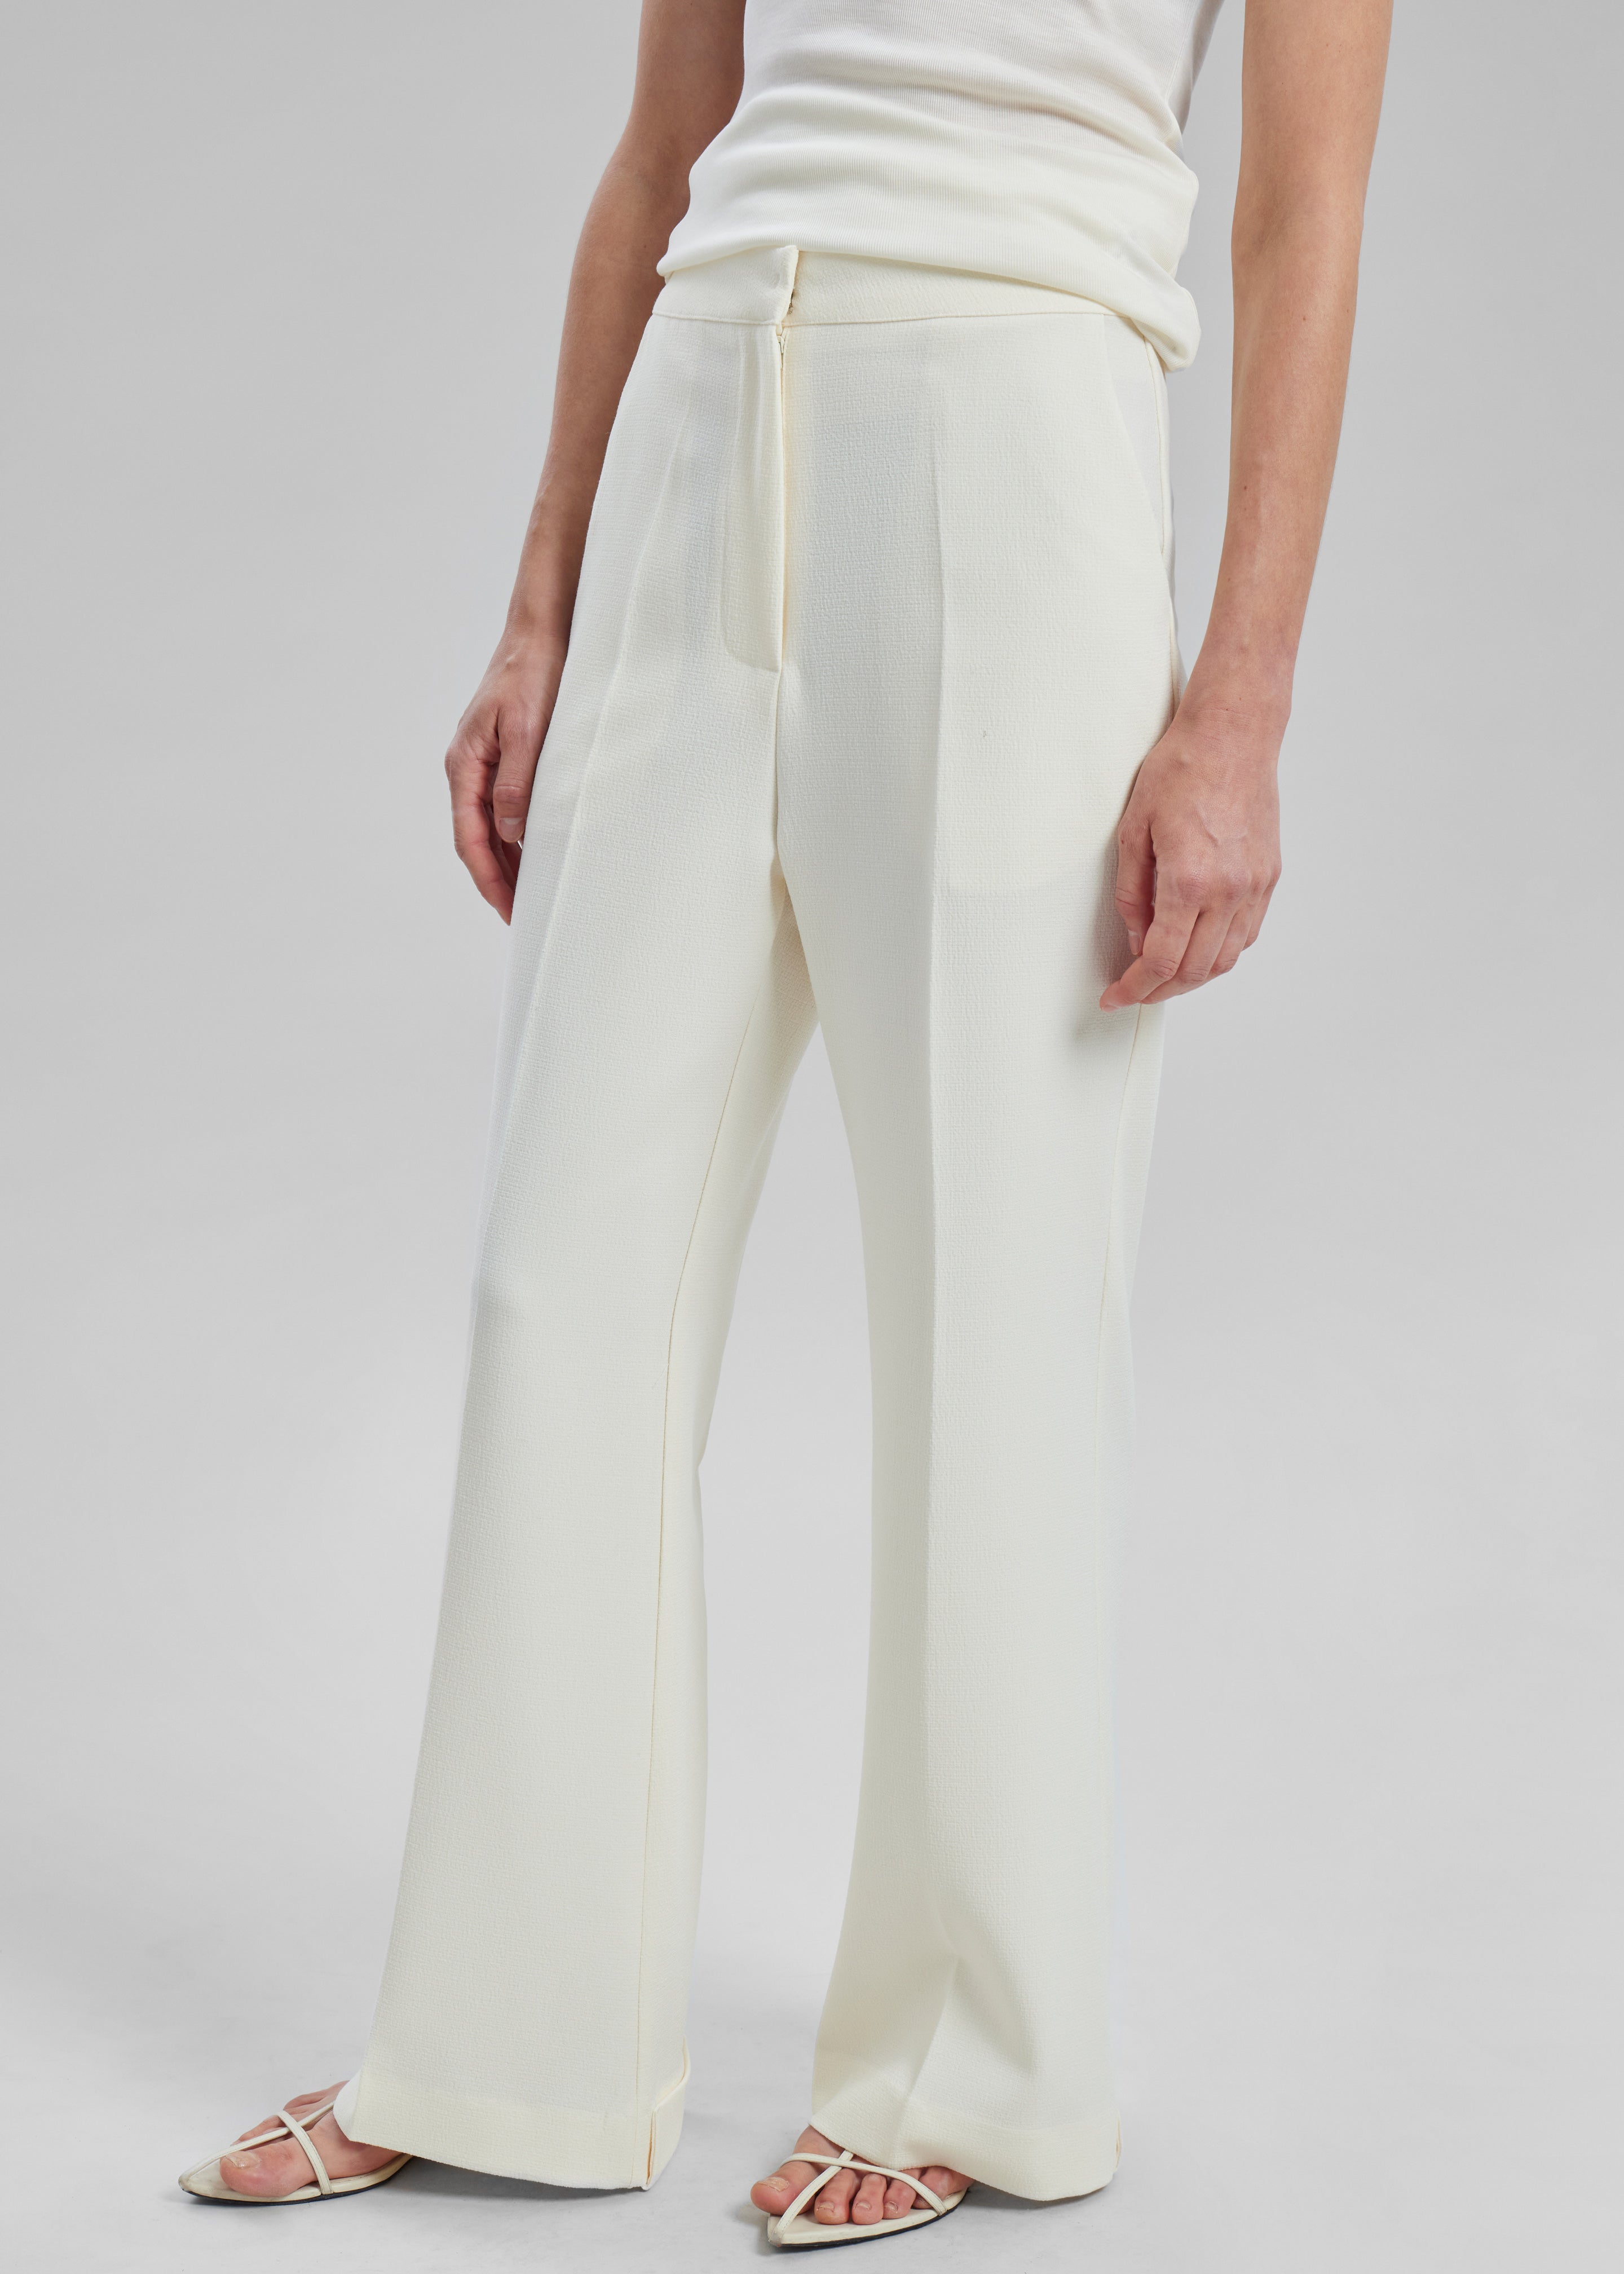 Layne Trousers - Off White - 2